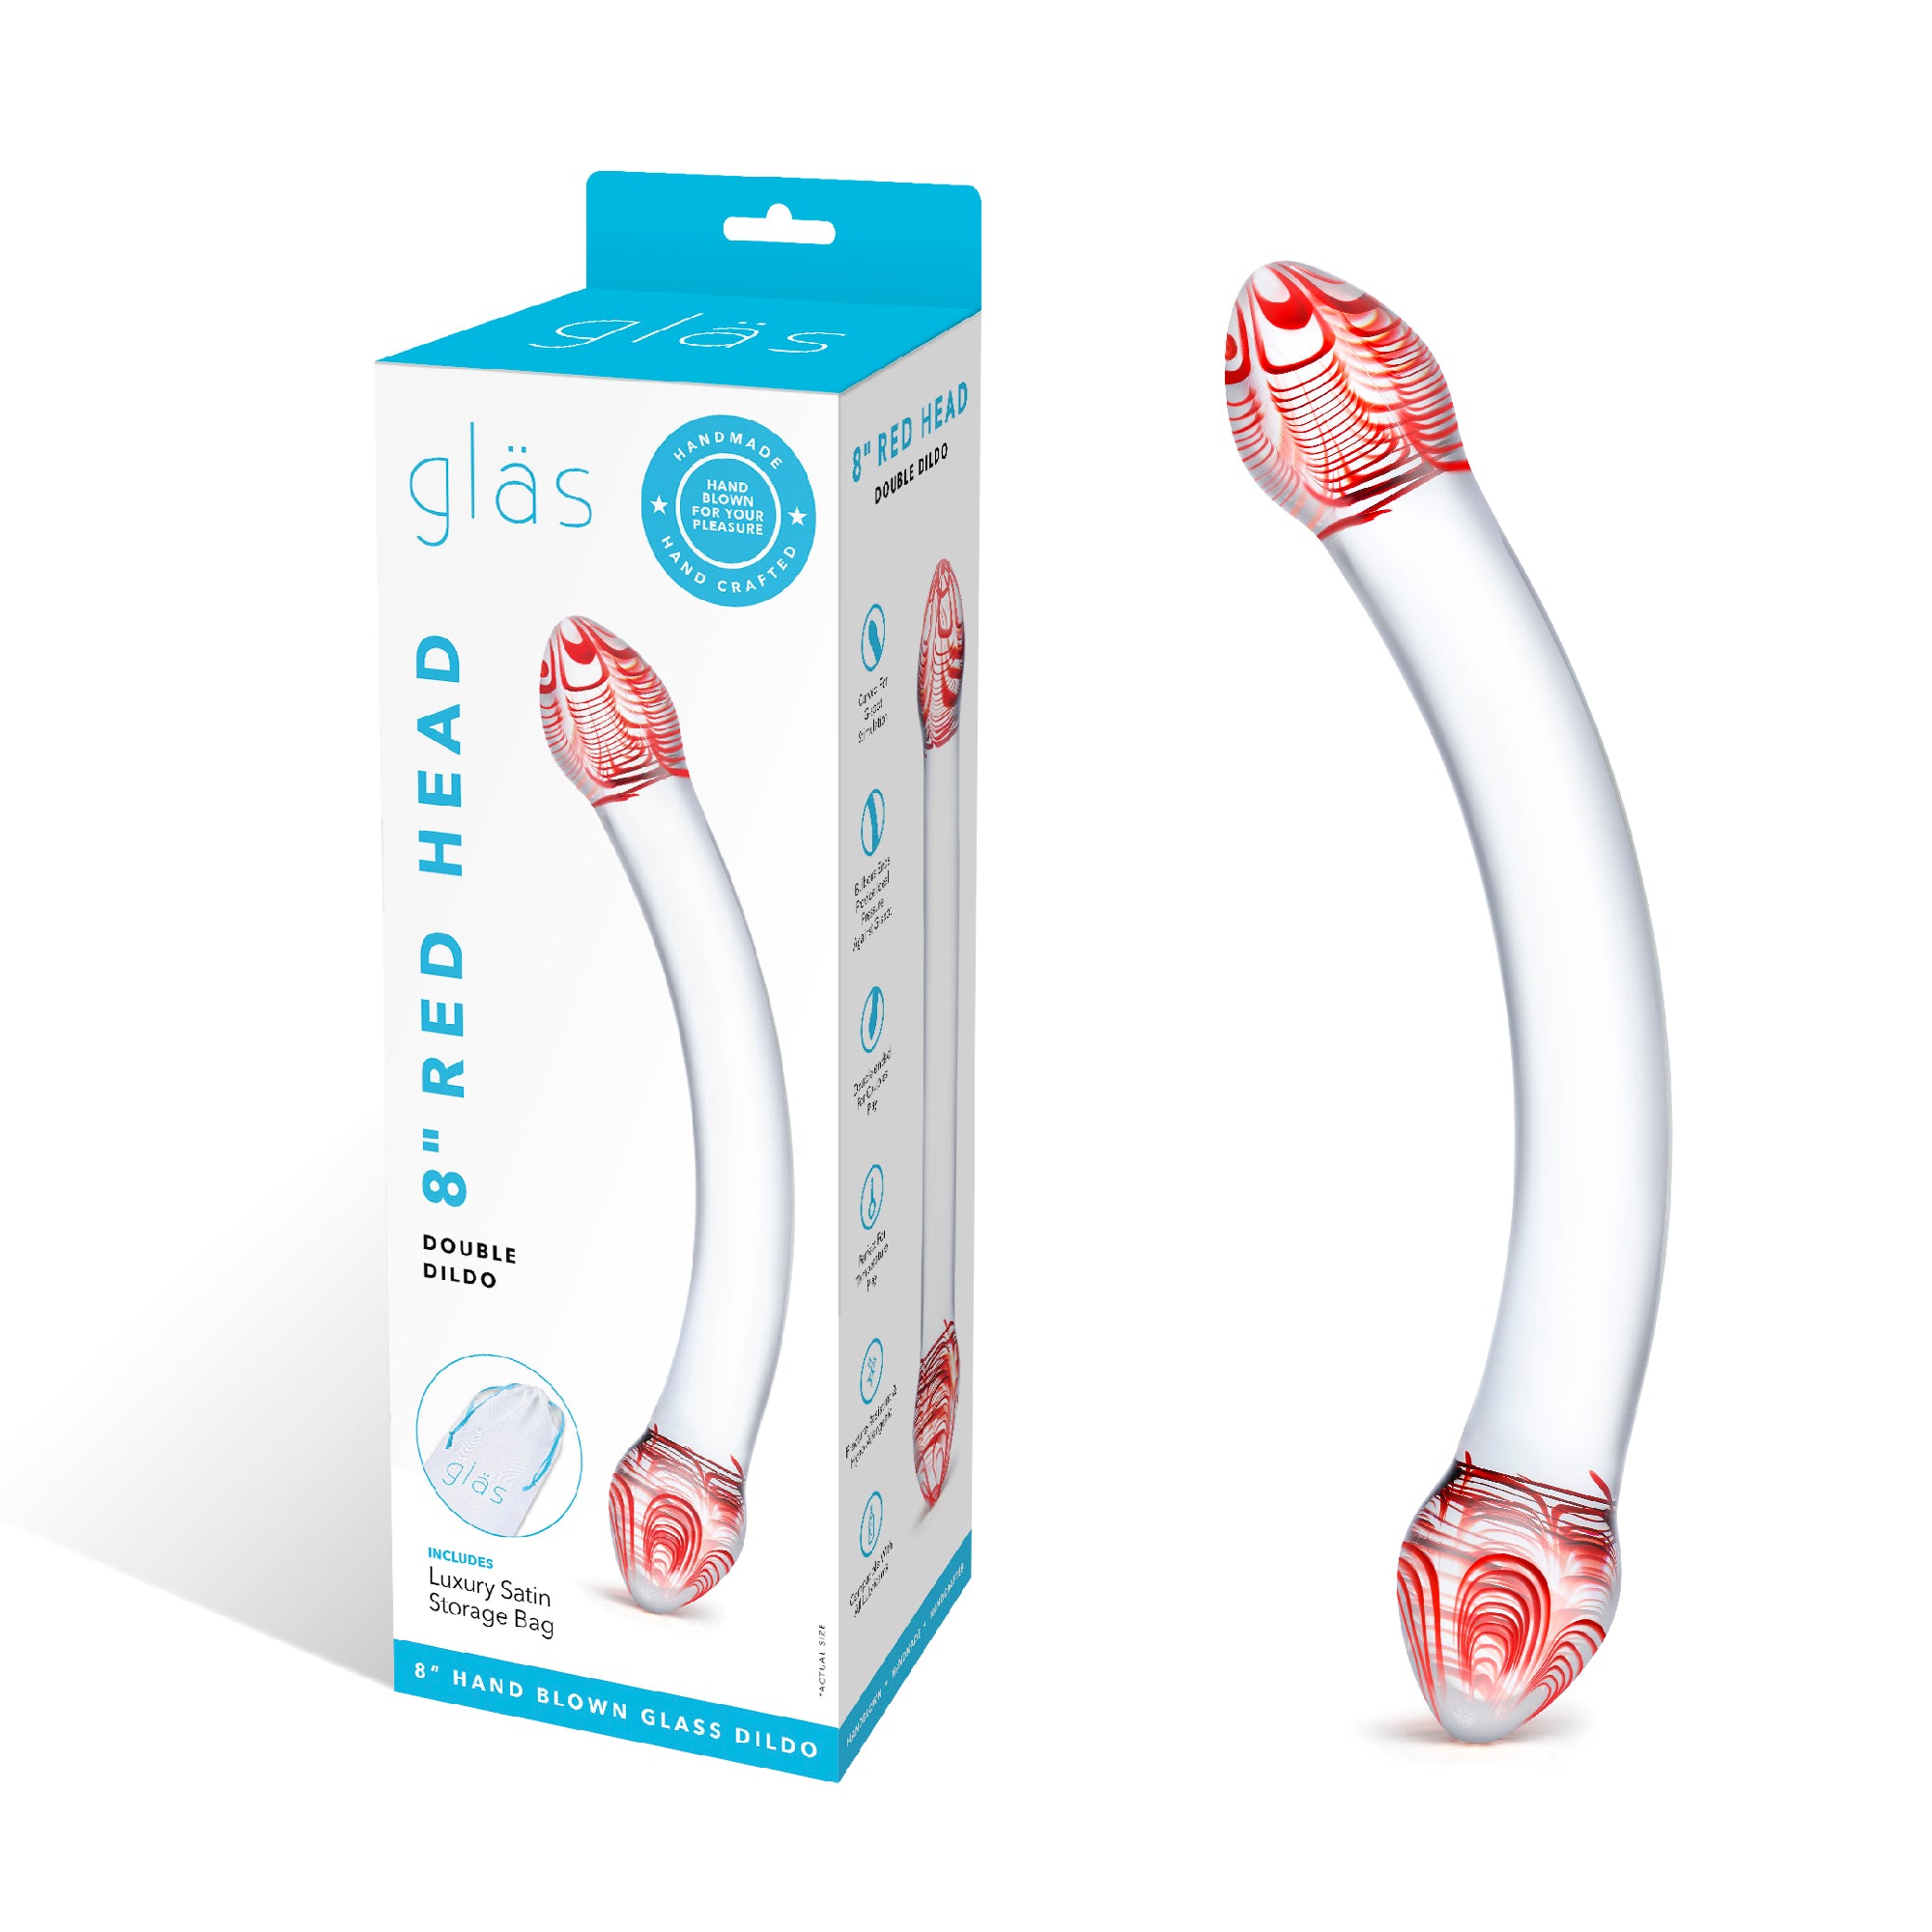 Packaging of the Gläs Red Head Glass Double Dildo